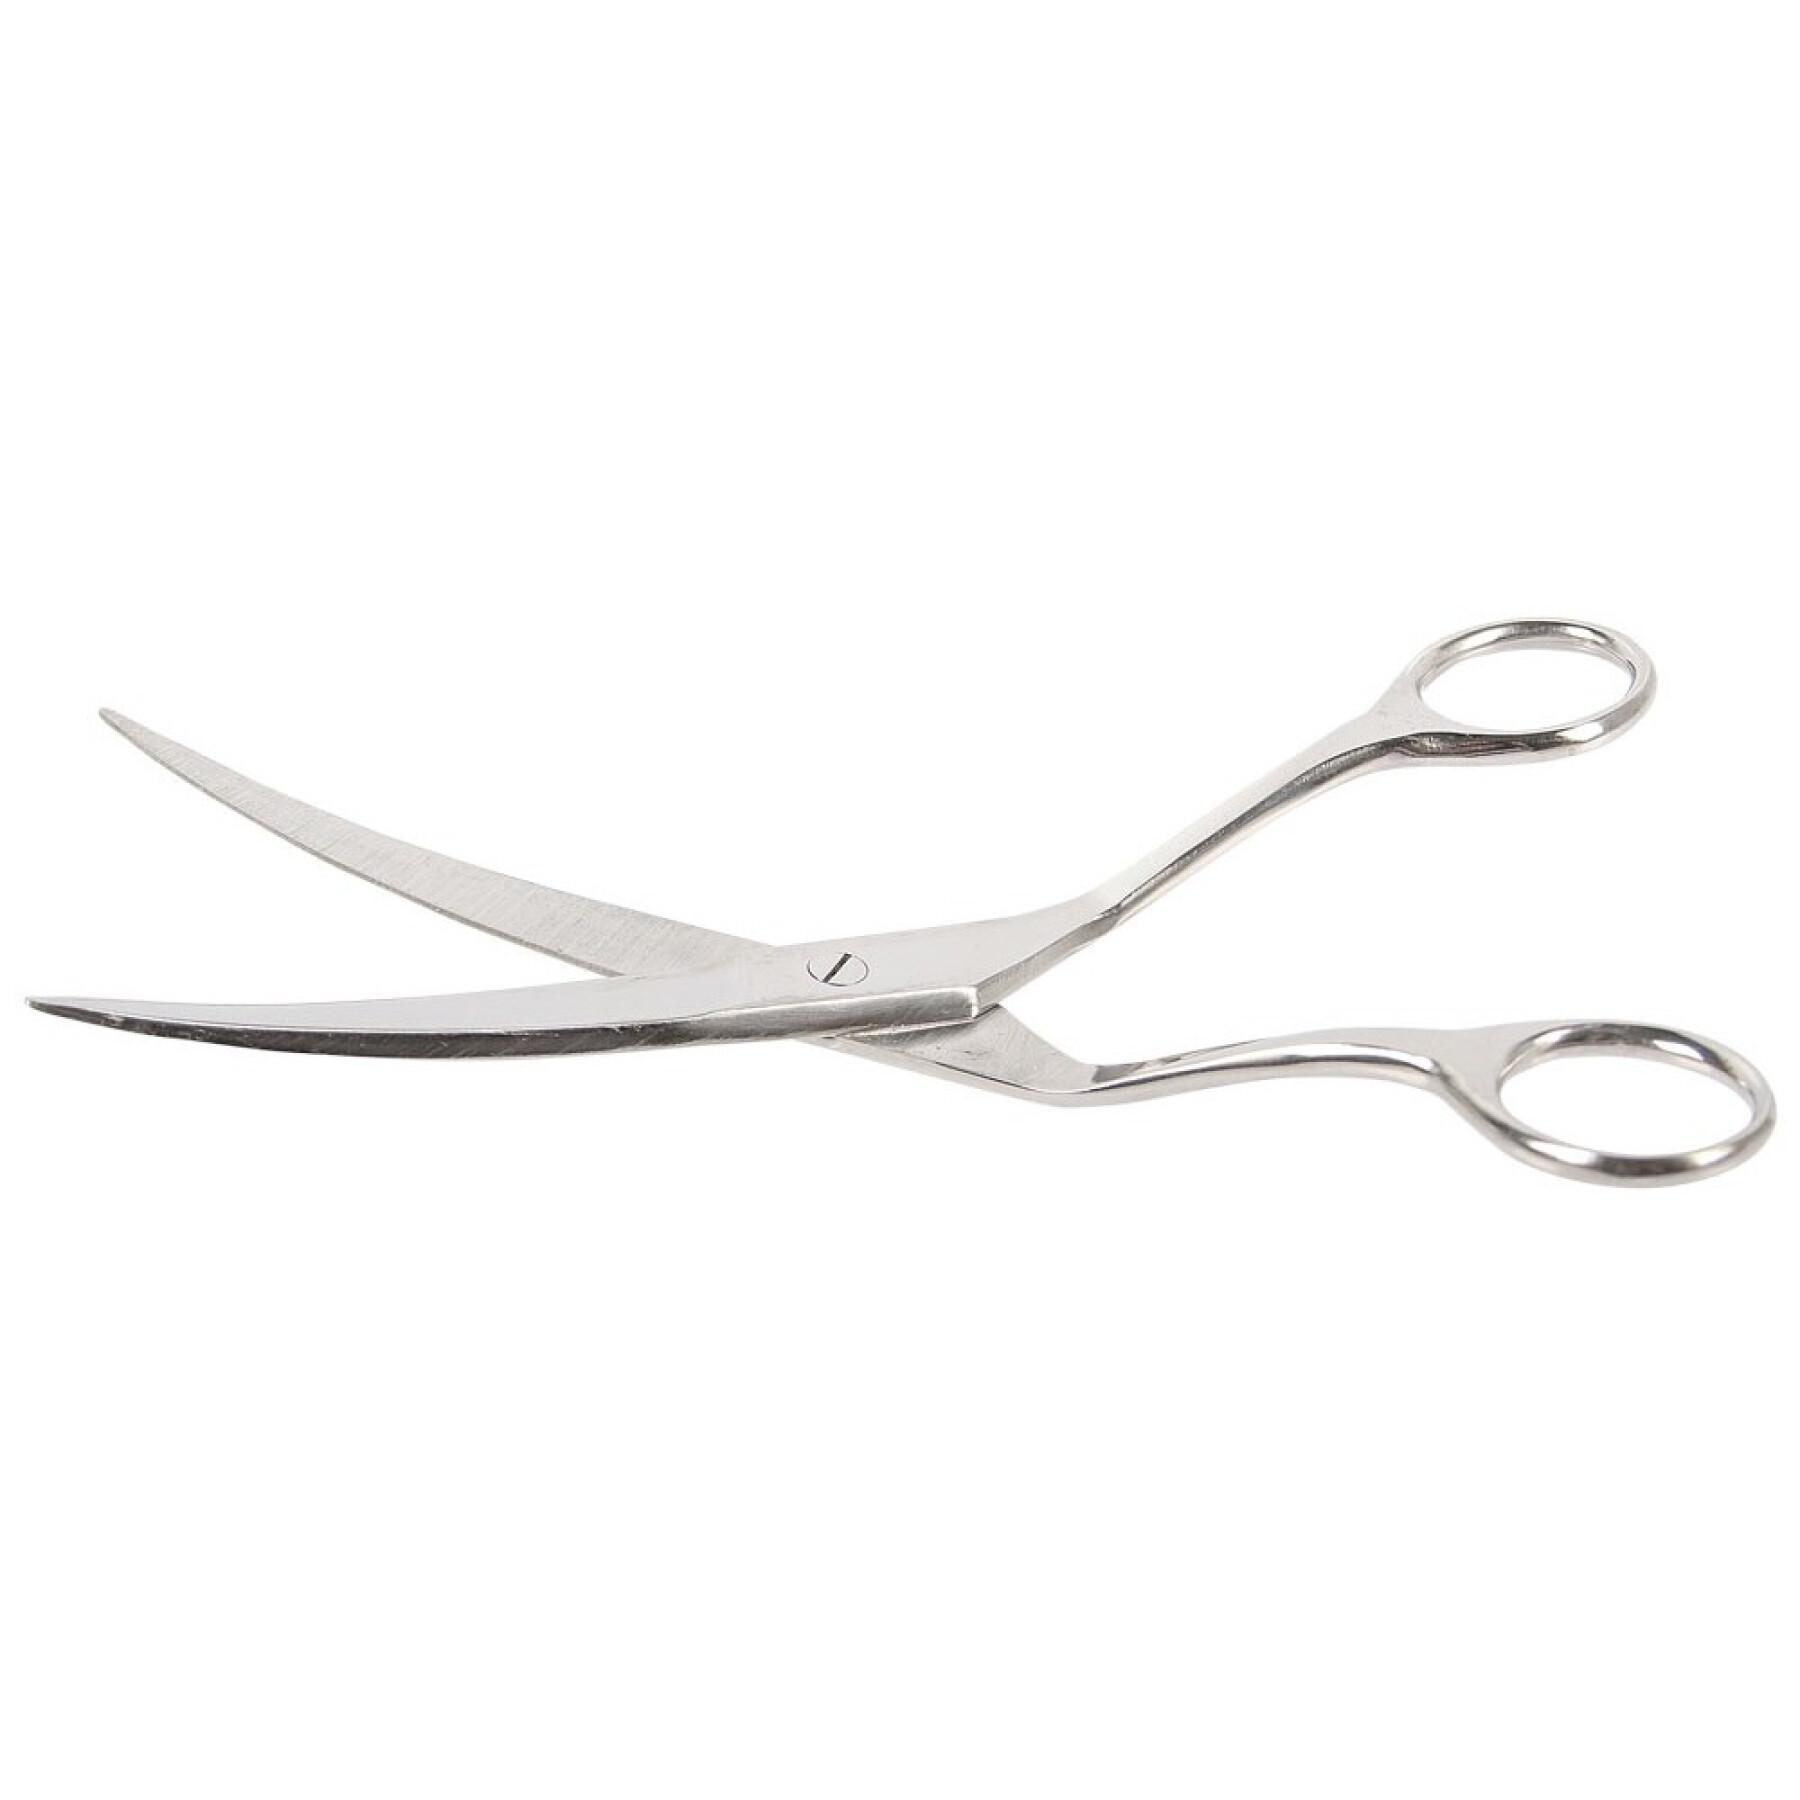 Curved grooming scissors Harry's Horse